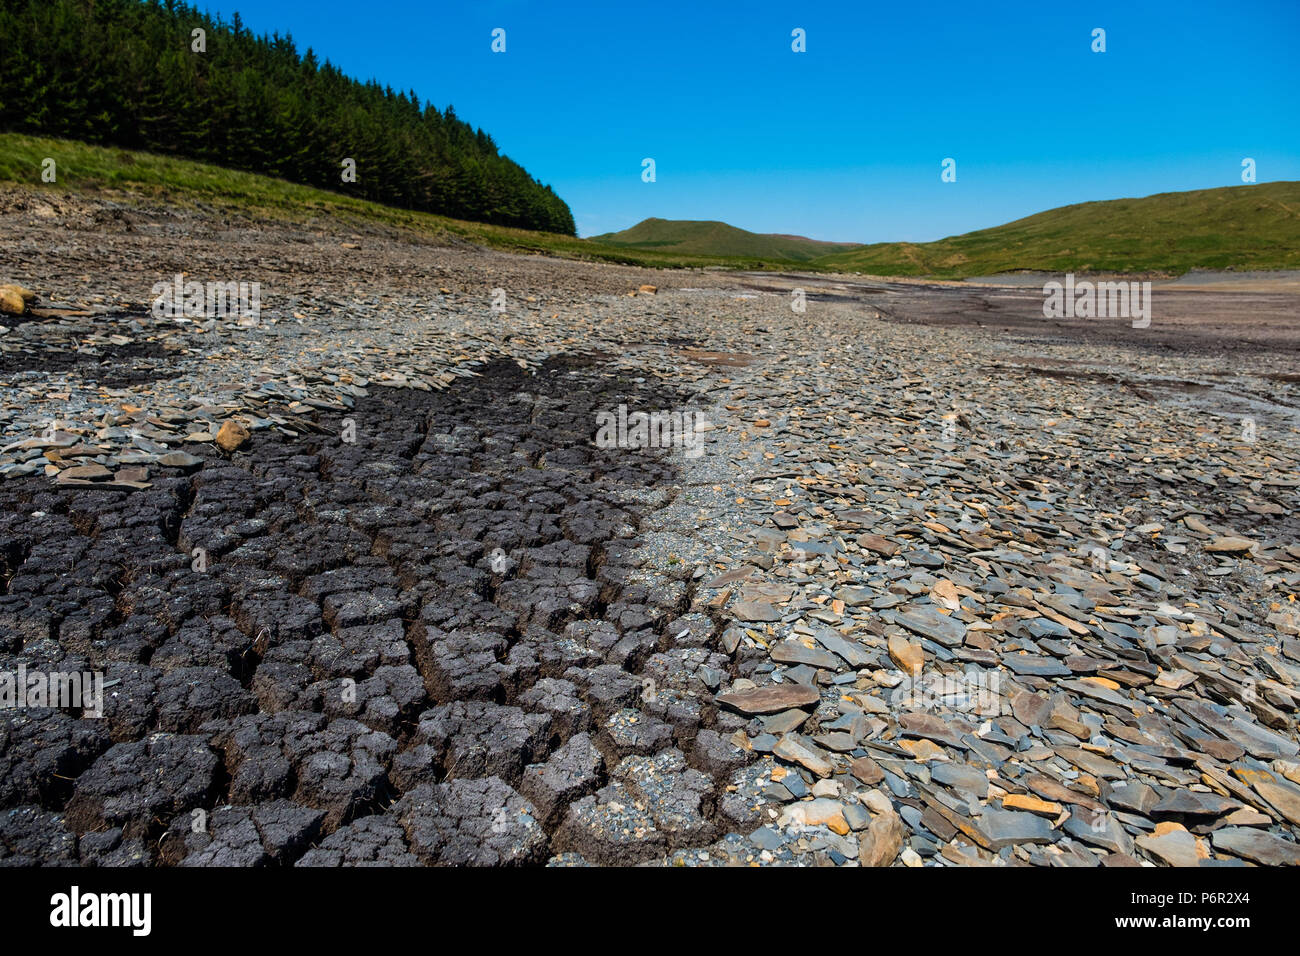 Nant y Moch, Ceredigion, Wales UK, 02 July 2018  UK Weather: After a very long dry and hot spell of weather,  the reservoir at Nant y Moch, just inland of Aberystwyth, has fallen to dramatically low levels last seen in the long hot summer of 1976.  Already, some local properties the nearly village of Ponterwyd, , that draw their water from  wells and springs, have seen their water supplies dry up and disappear   photo credit Keith Morris / Alamy Live News Stock Photo